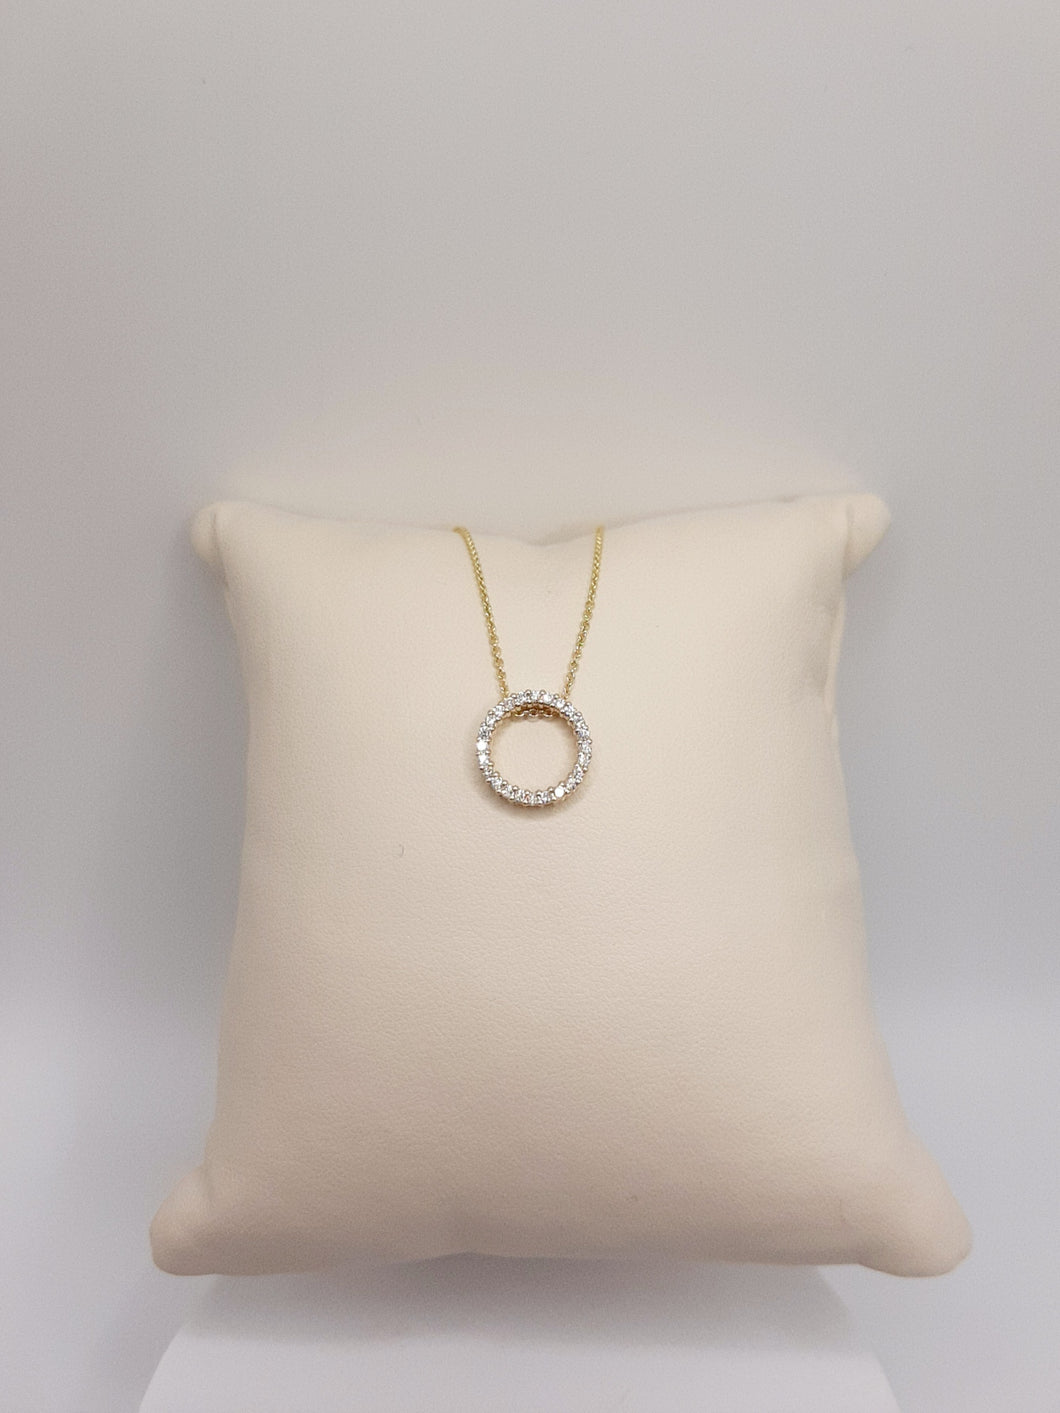 14Kt Yellow Gold Circle Necklace featuring .25 Carats of Round Brilliant Cut Diamonds on an adjustable 16-18